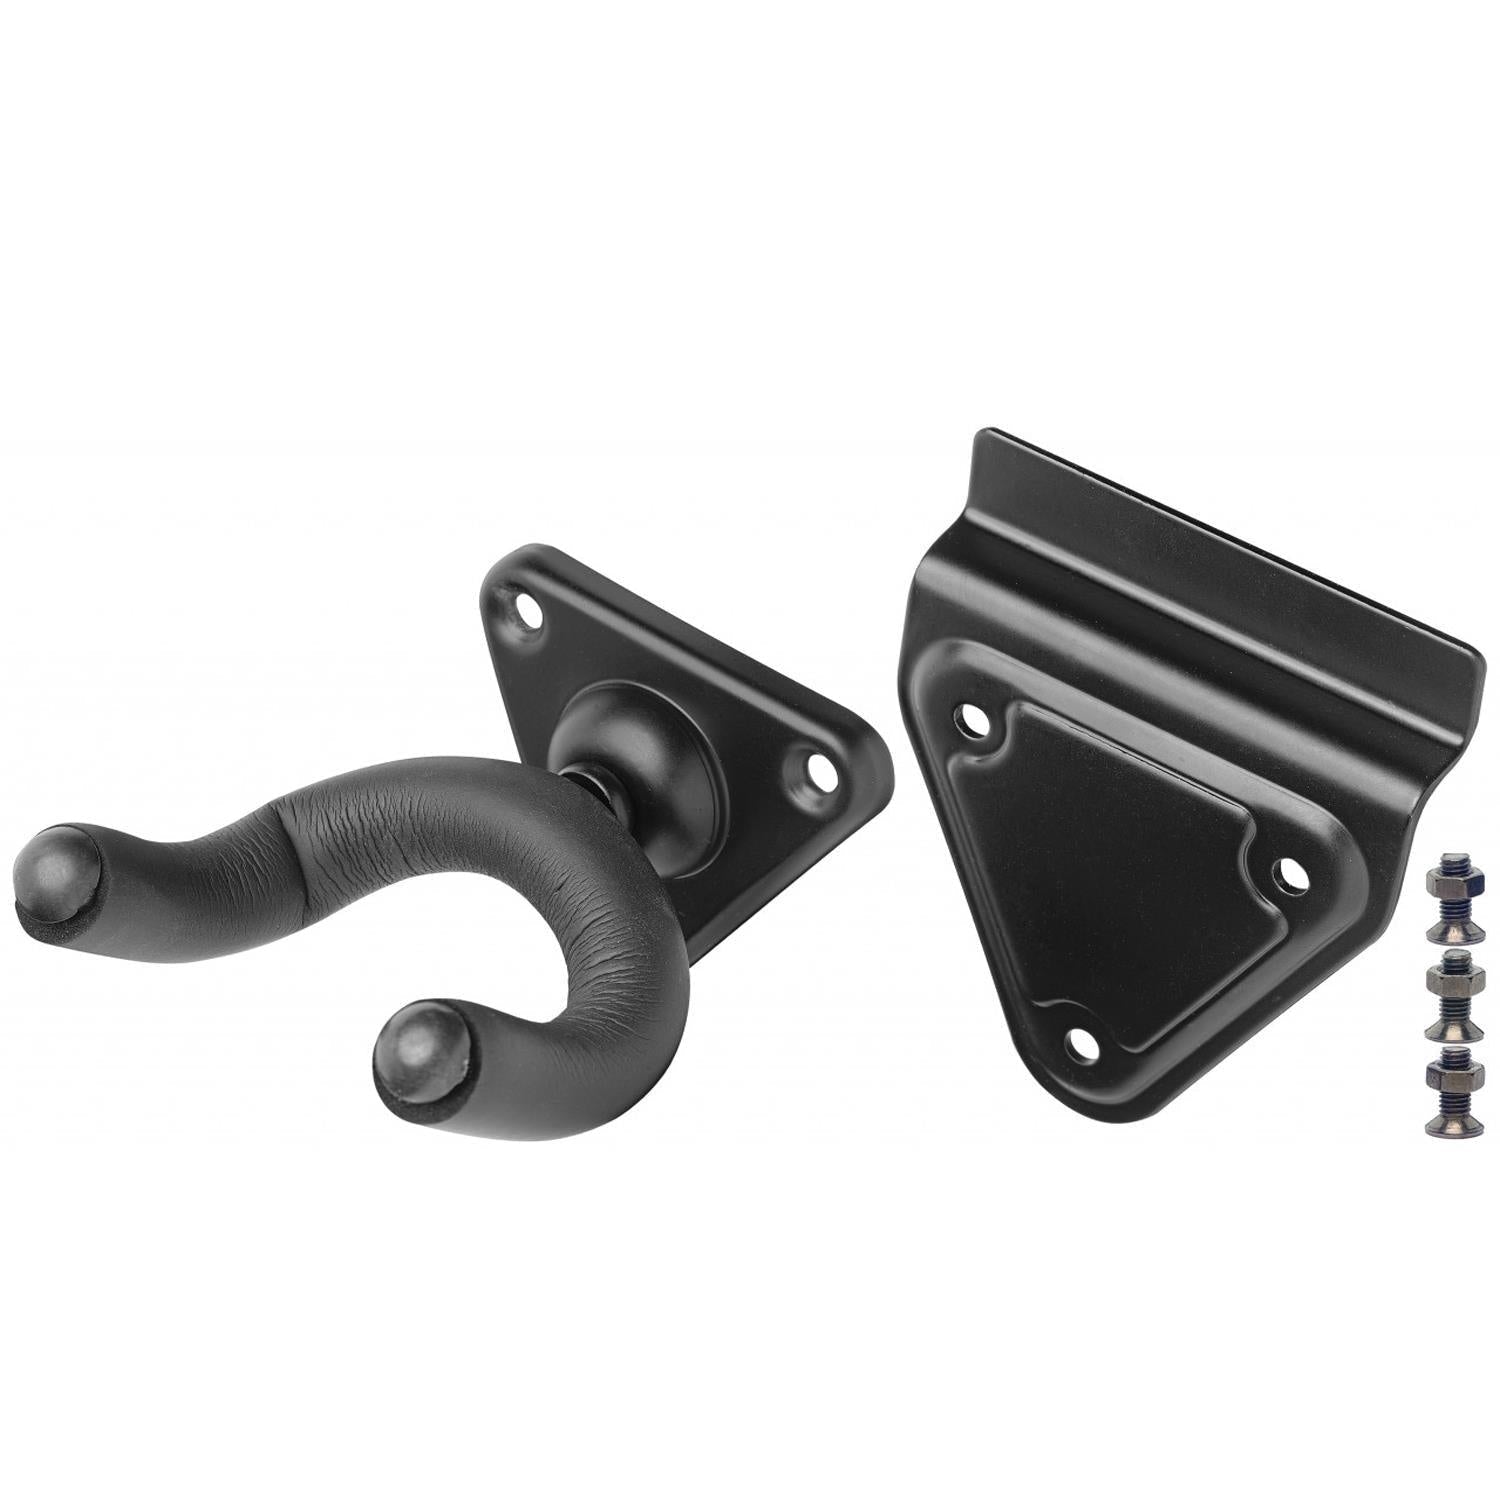 Stagg GUH-A2 Guitar Wall Mount Hanger - DY Pro Audio